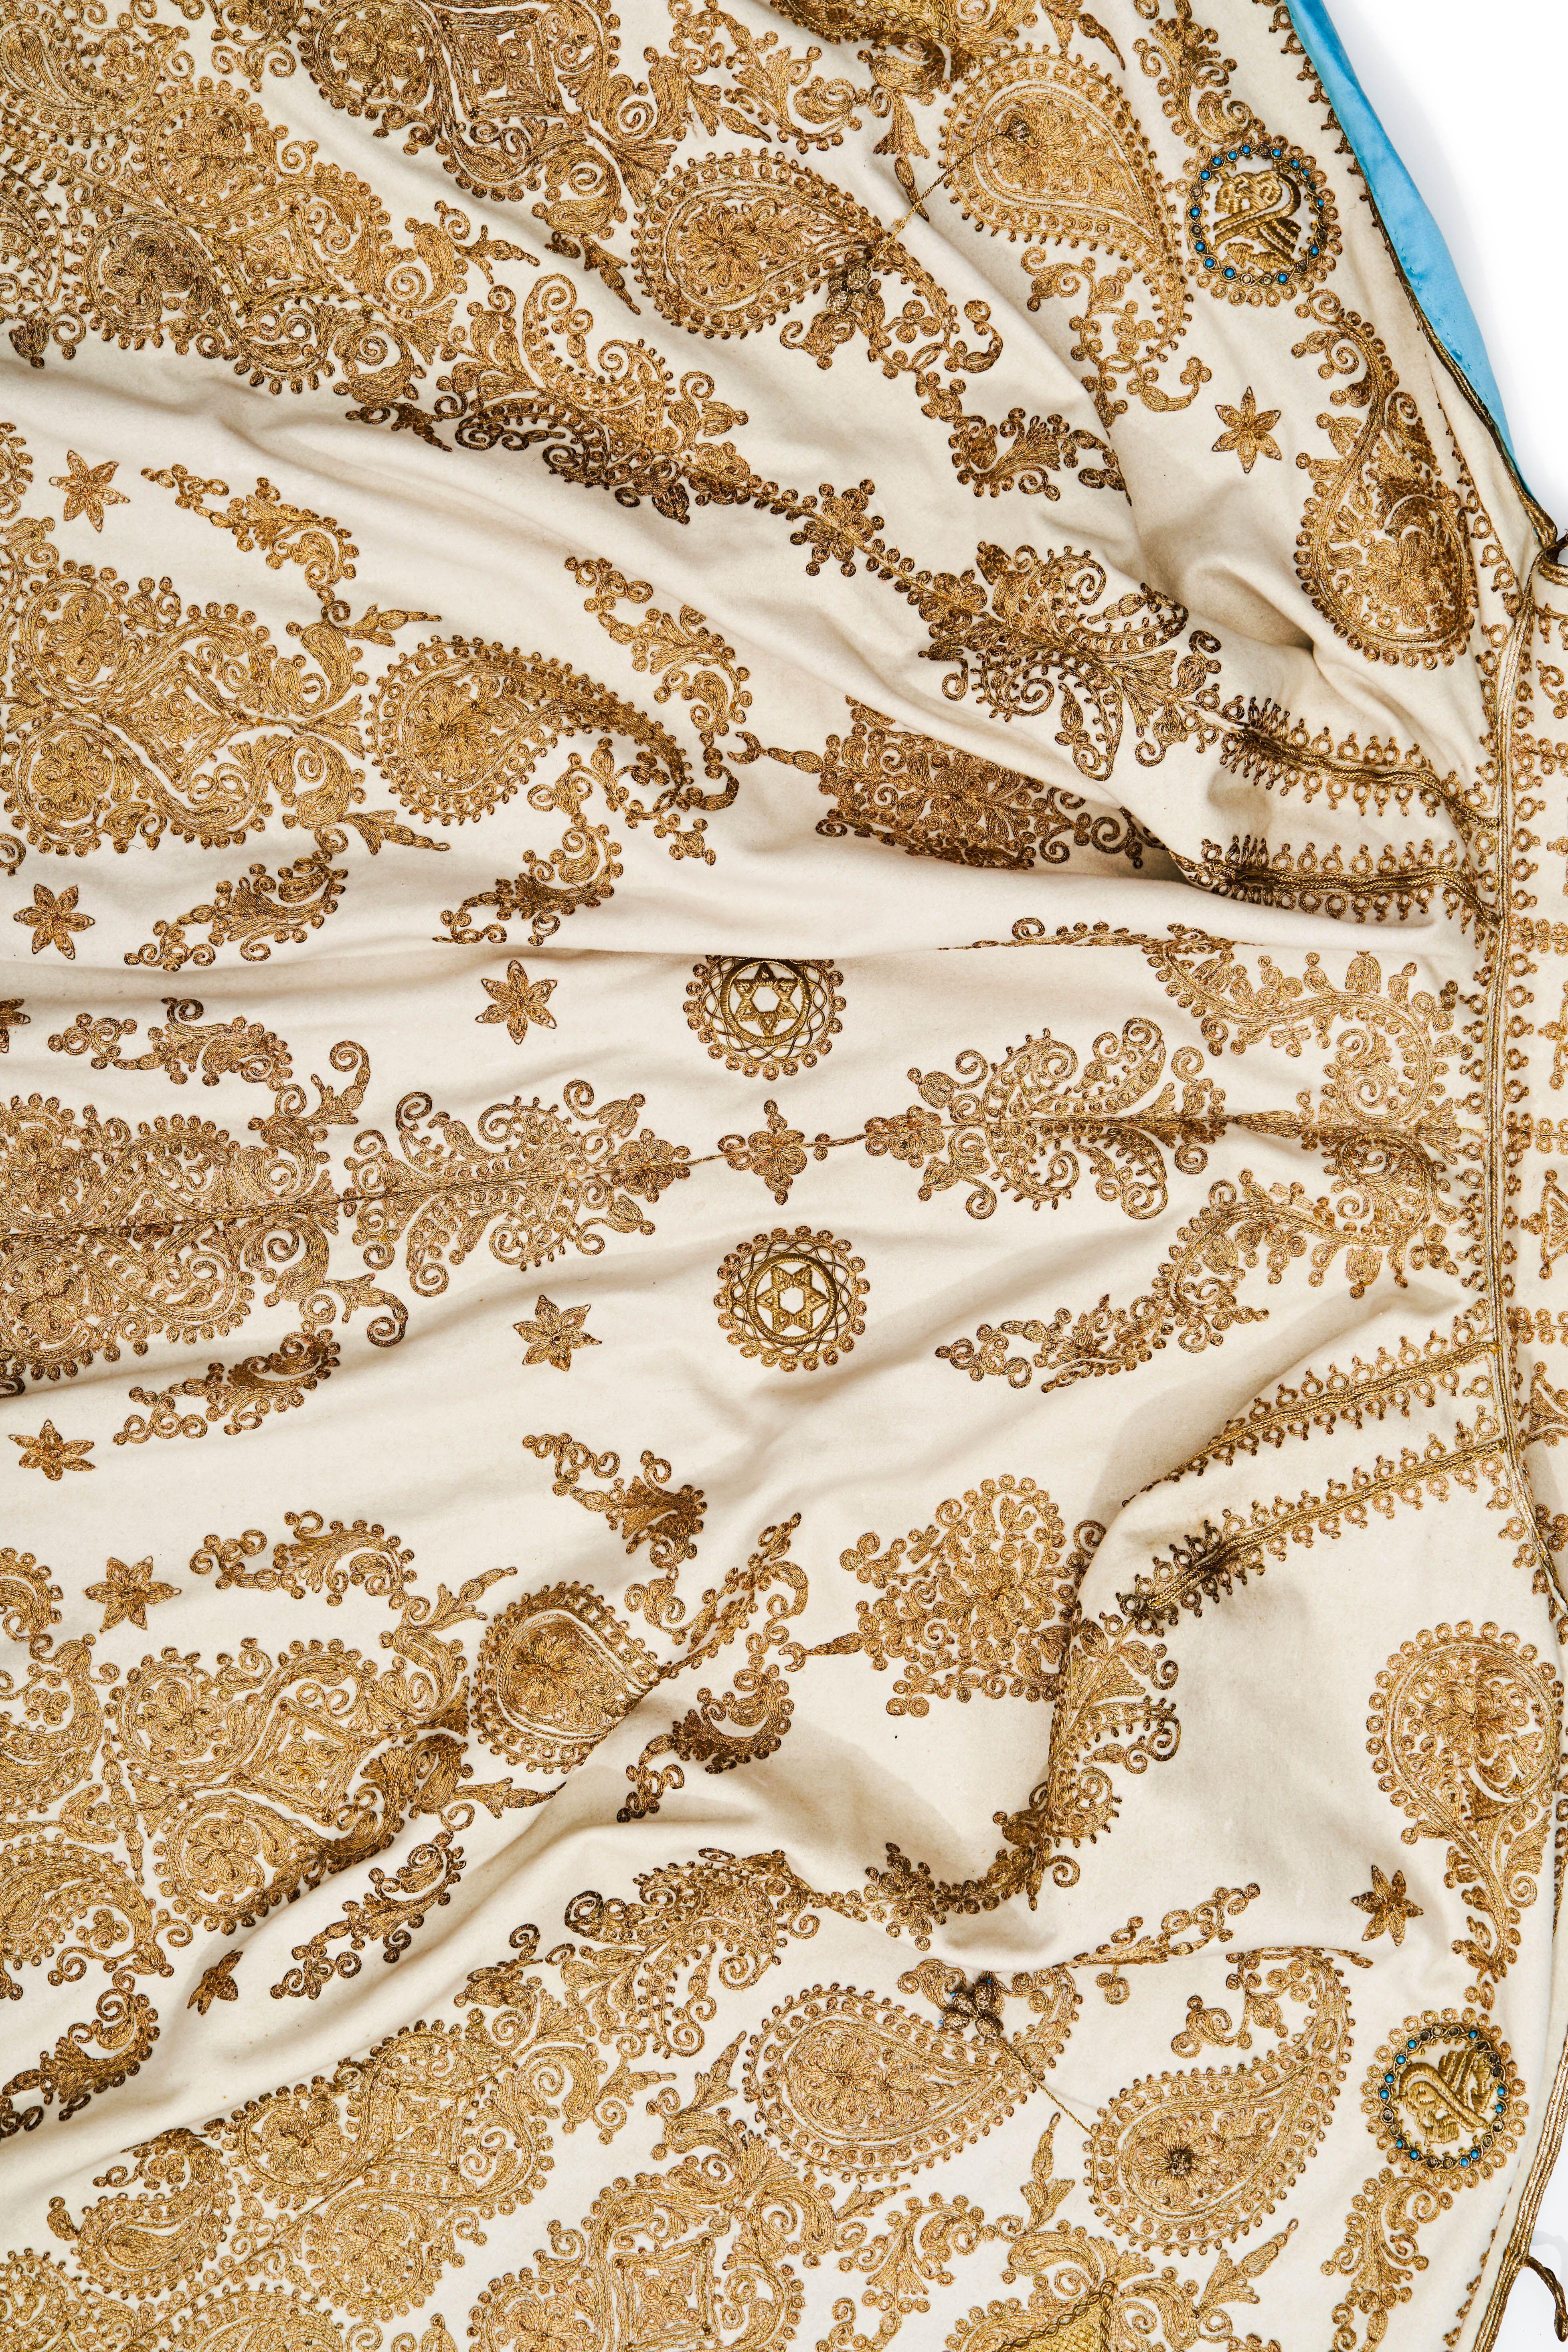 SILK, WOOL AND SILVER GILT MOROCCAN EMBROIDERY CEREMONIAL CAPE - Image 4 of 5